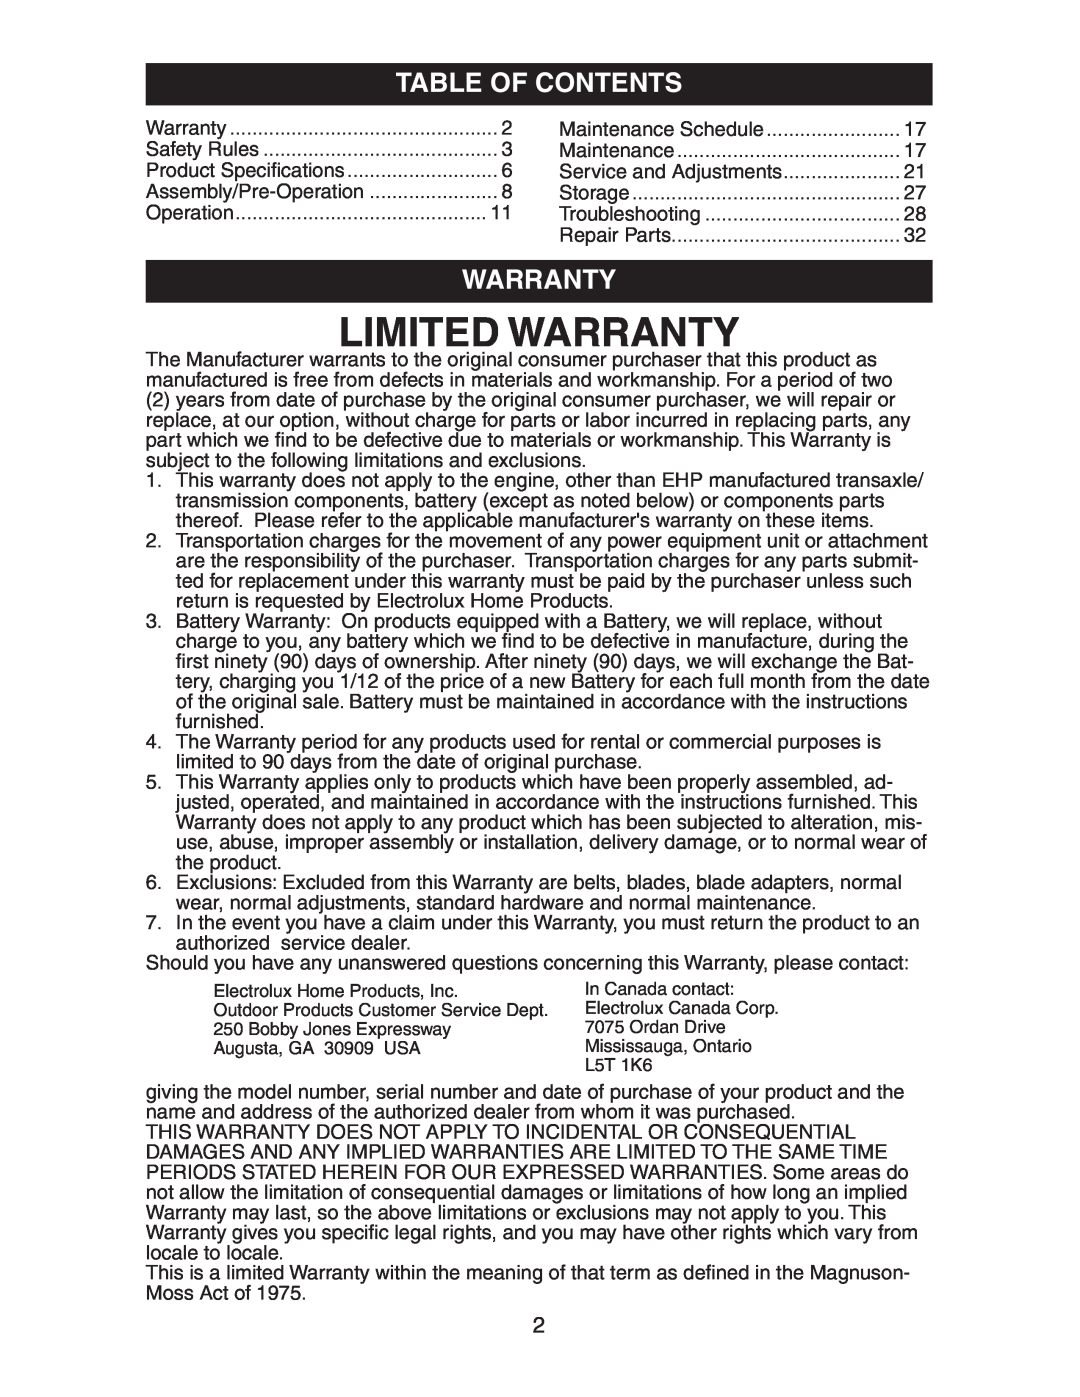 Electrolux AG15538B manual Table Of Contents, Limited Warranty 